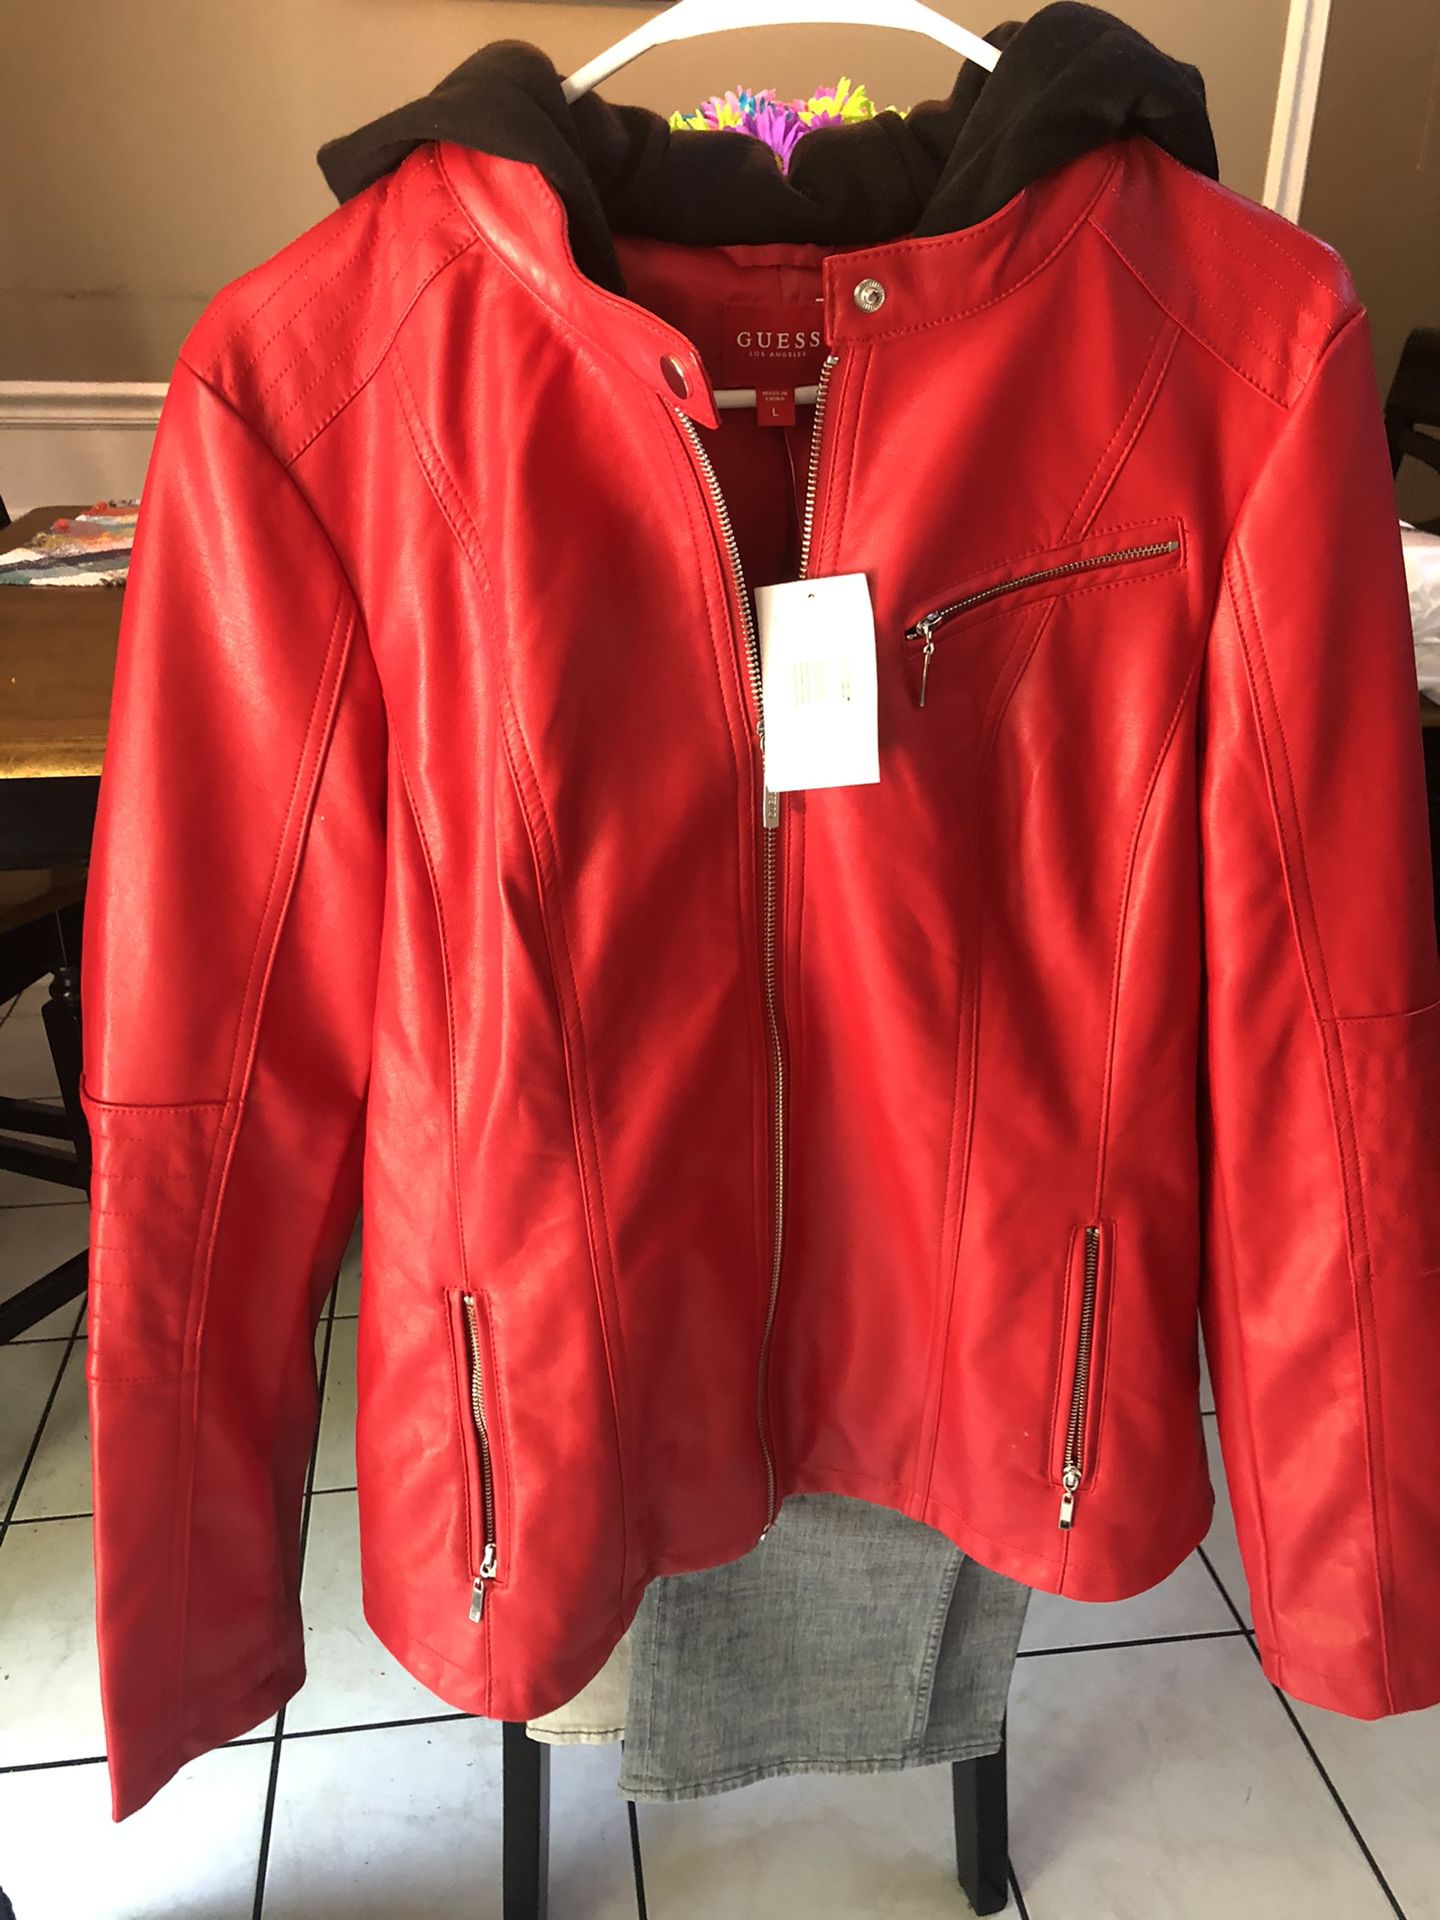 Guess leather jacket ***never worn ***